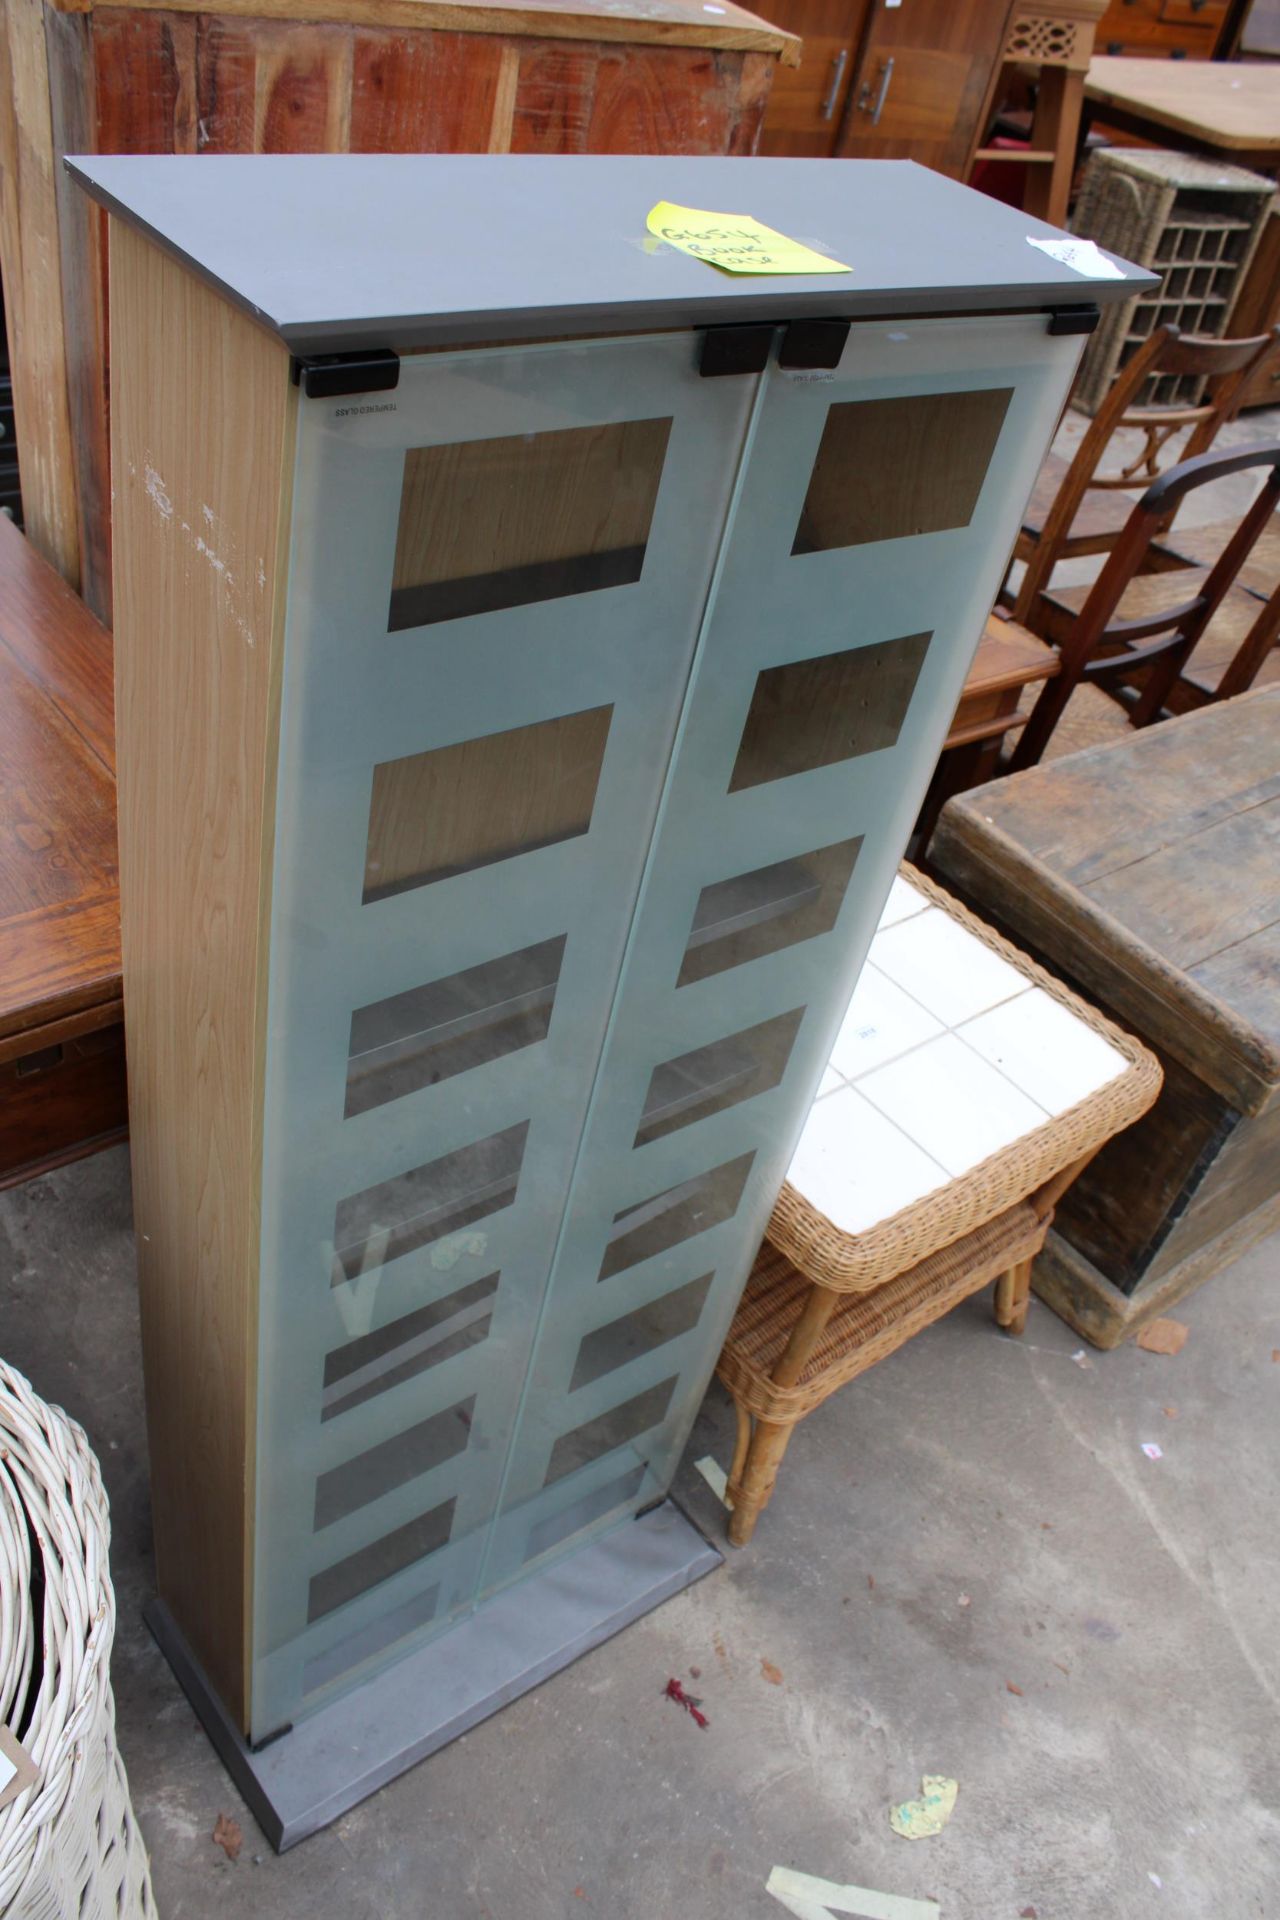 A TWO TIER WICKER LAMP TABLE WITH TILED TOP AND A GLASS FRONTED TWO DOOR BOOKCASE - Image 3 of 3